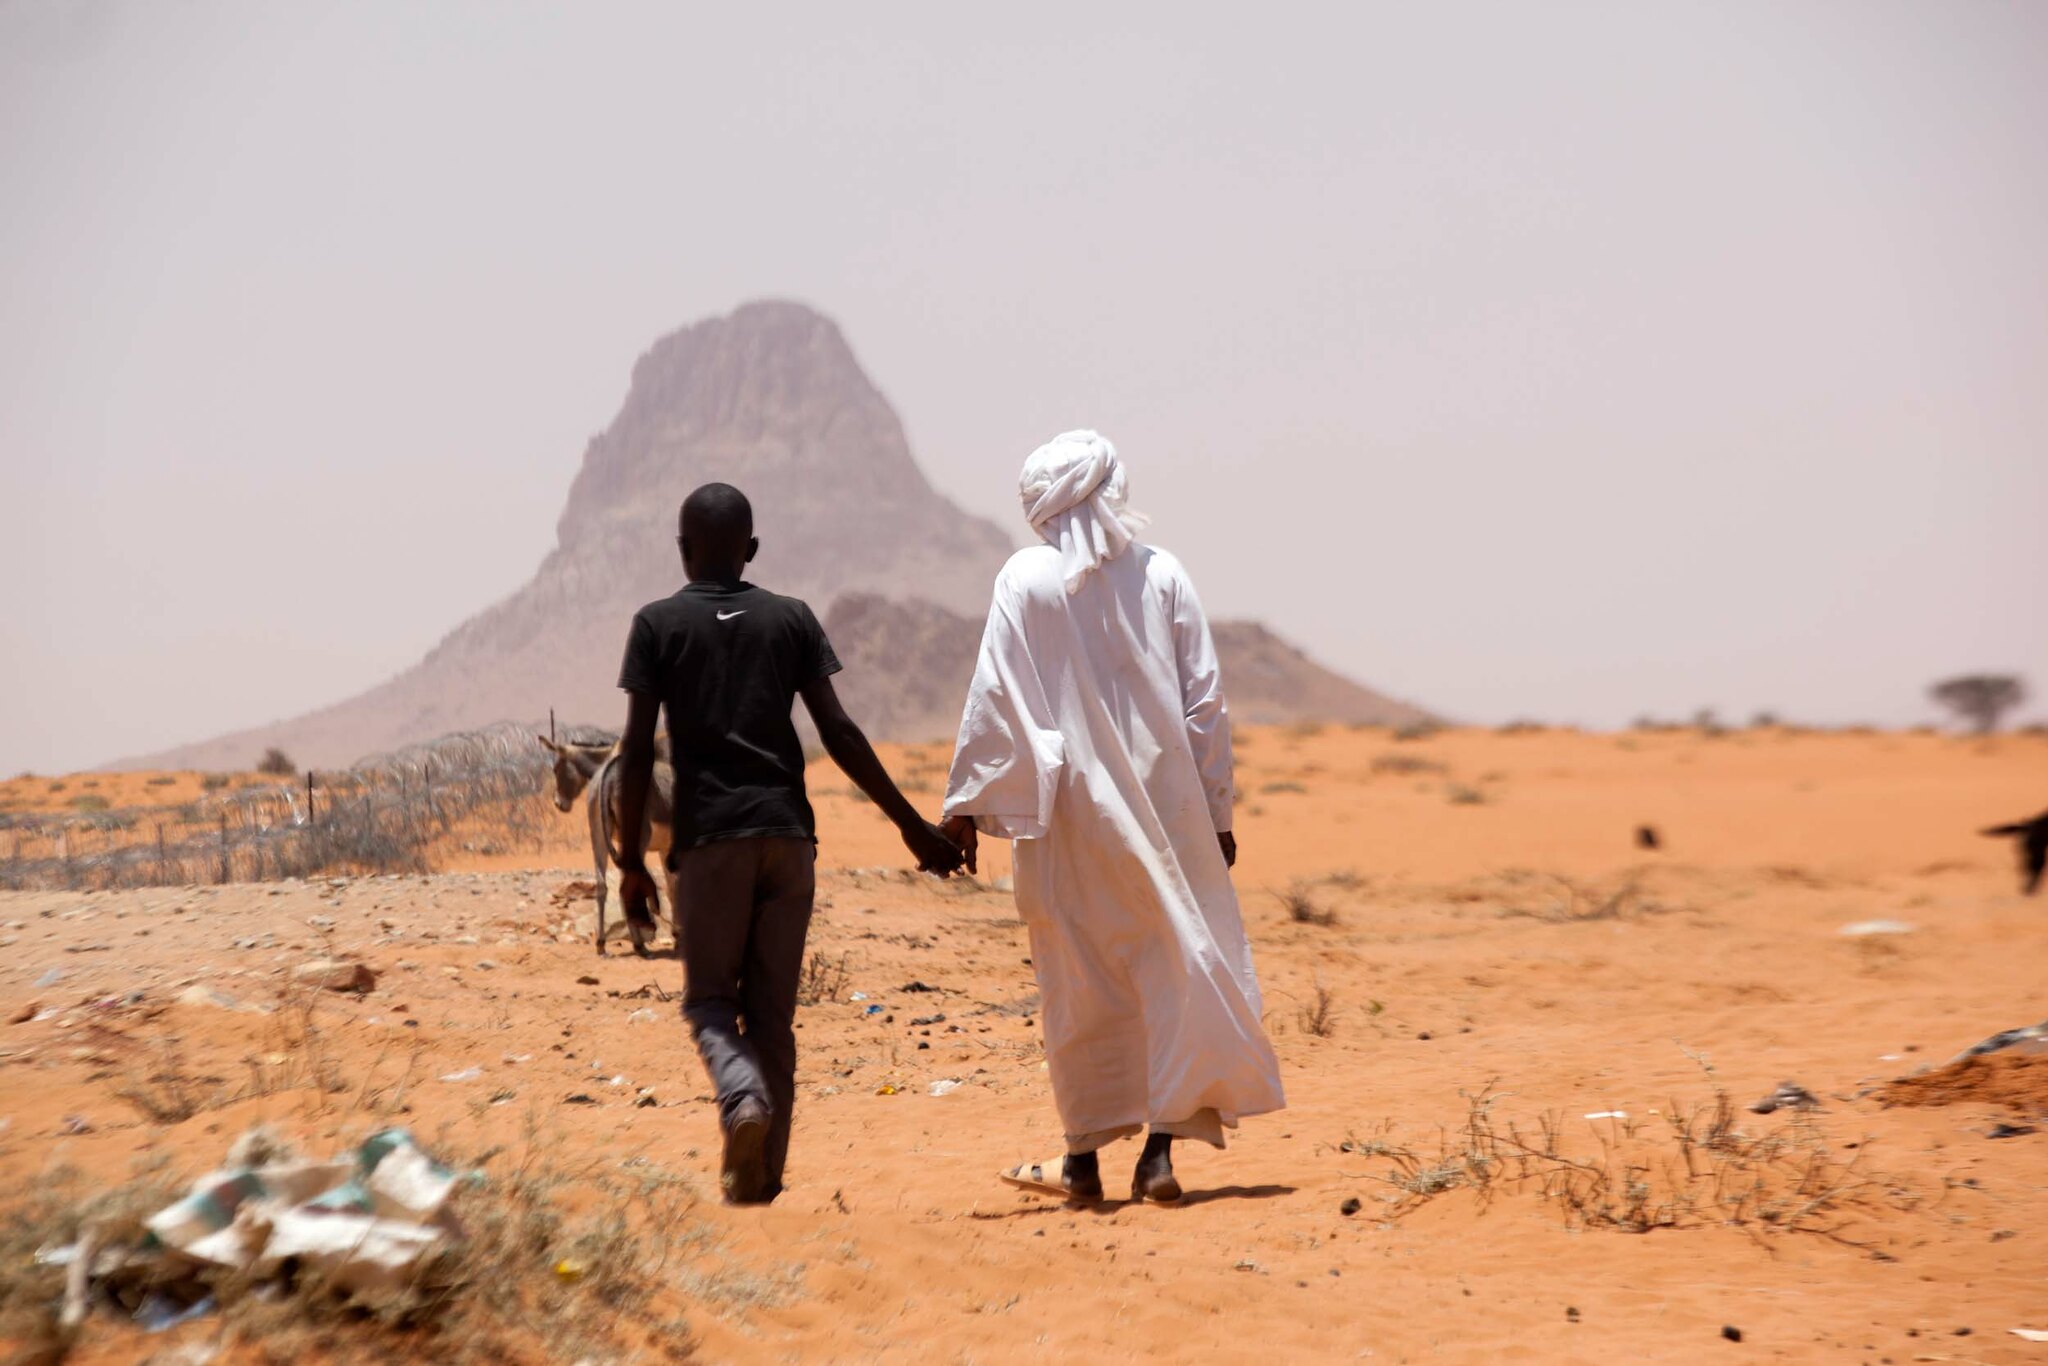 Internally displaced people in Sudan who's villages were attacked by armed groups suspected to be members of Rapid Support Forces and militia elements, 2014.